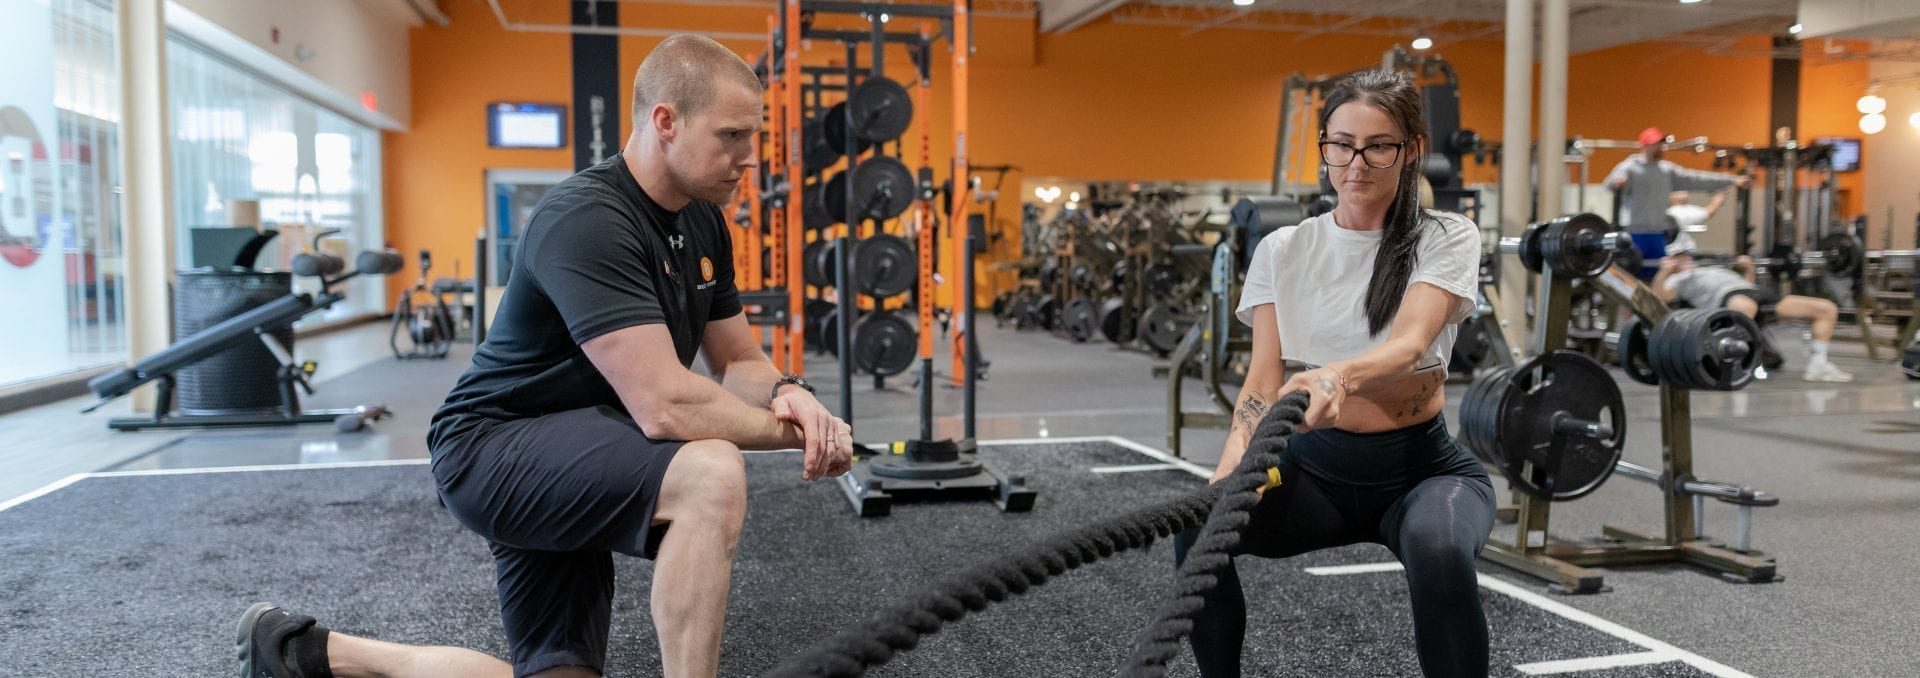 woman working out with personal trainer in gym